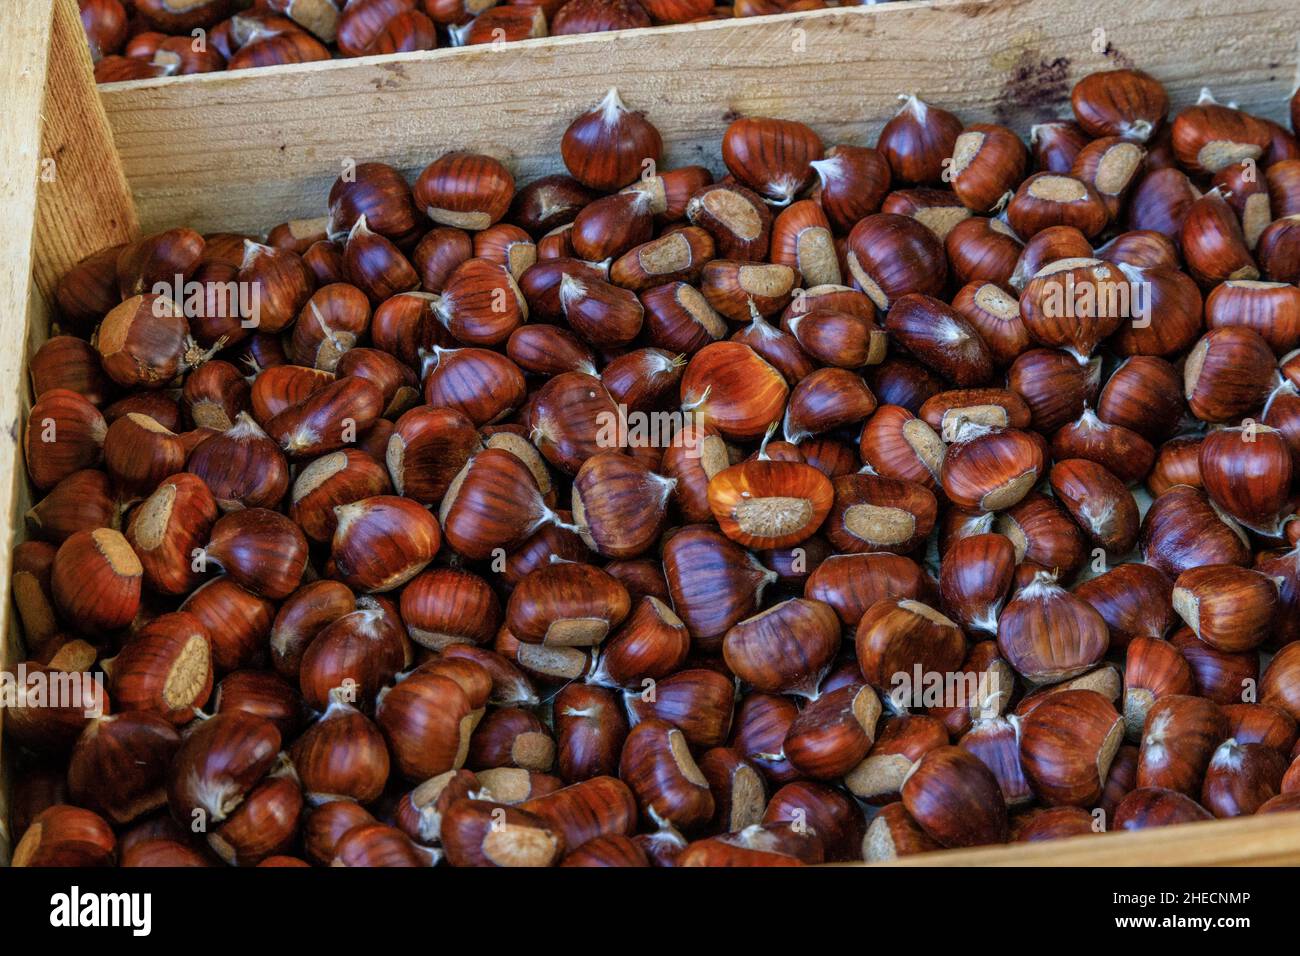 France, Var, Massif des Maures, Collobrieres, chestnut crate during the  Fetes de la Chataigne (Chestnut Festival) on the last three Sundays in Octobe Stock Photo